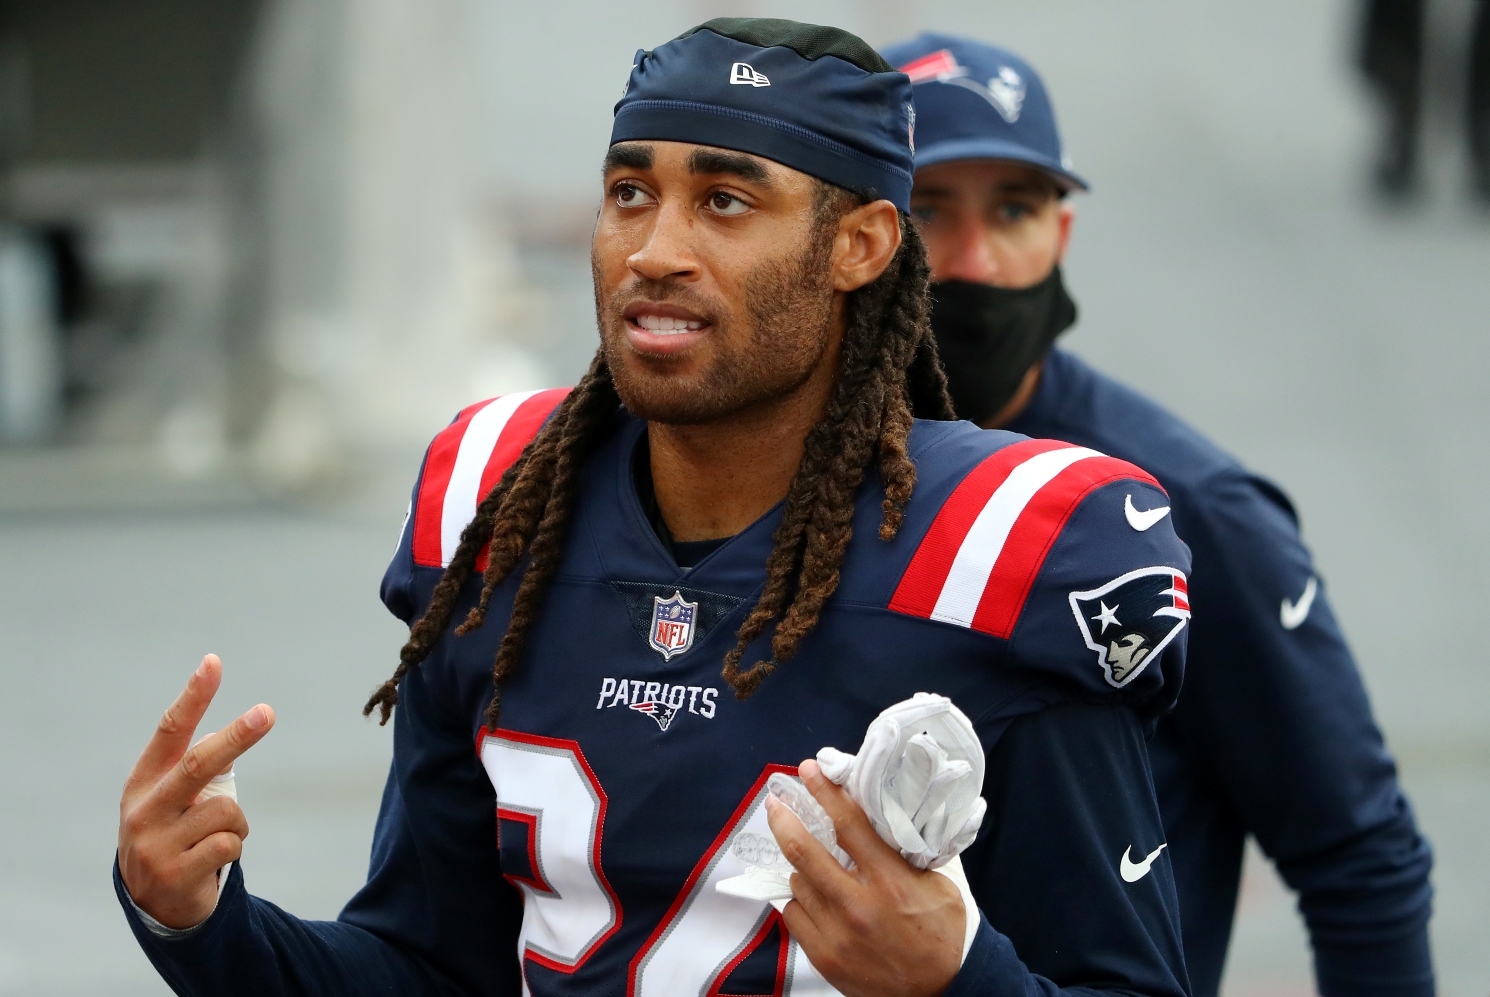 New England Patriots cornerback Stephon Gilmore signals to the crowd after a win.